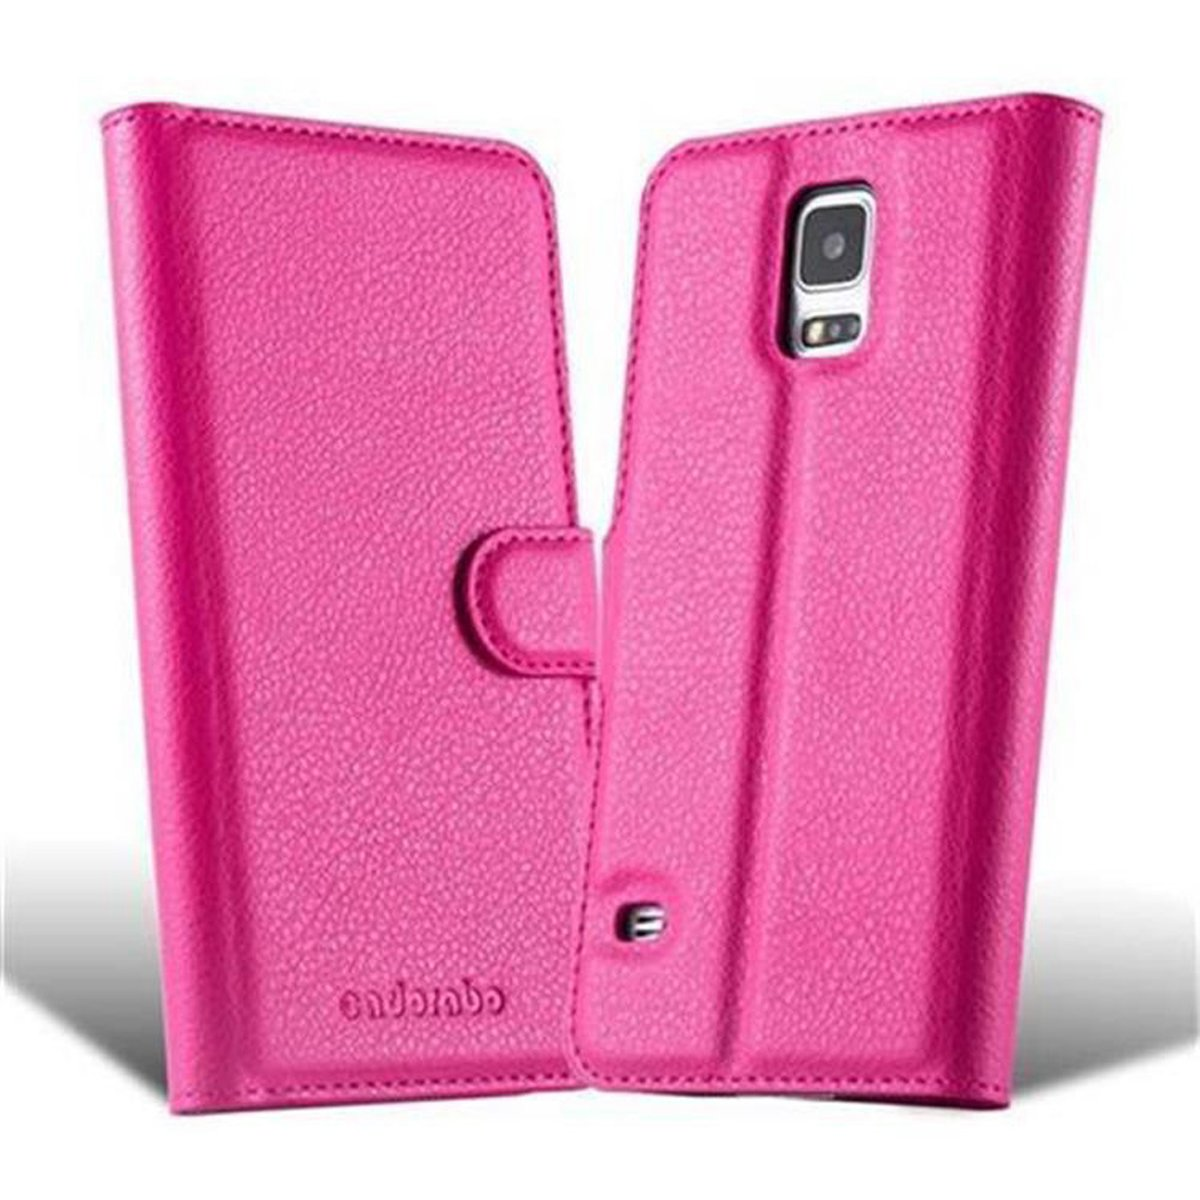 S5 Bookcover, NEO, / CHERRY PINK Samsung, Standfunktion, CADORABO S5 Galaxy Hülle Book